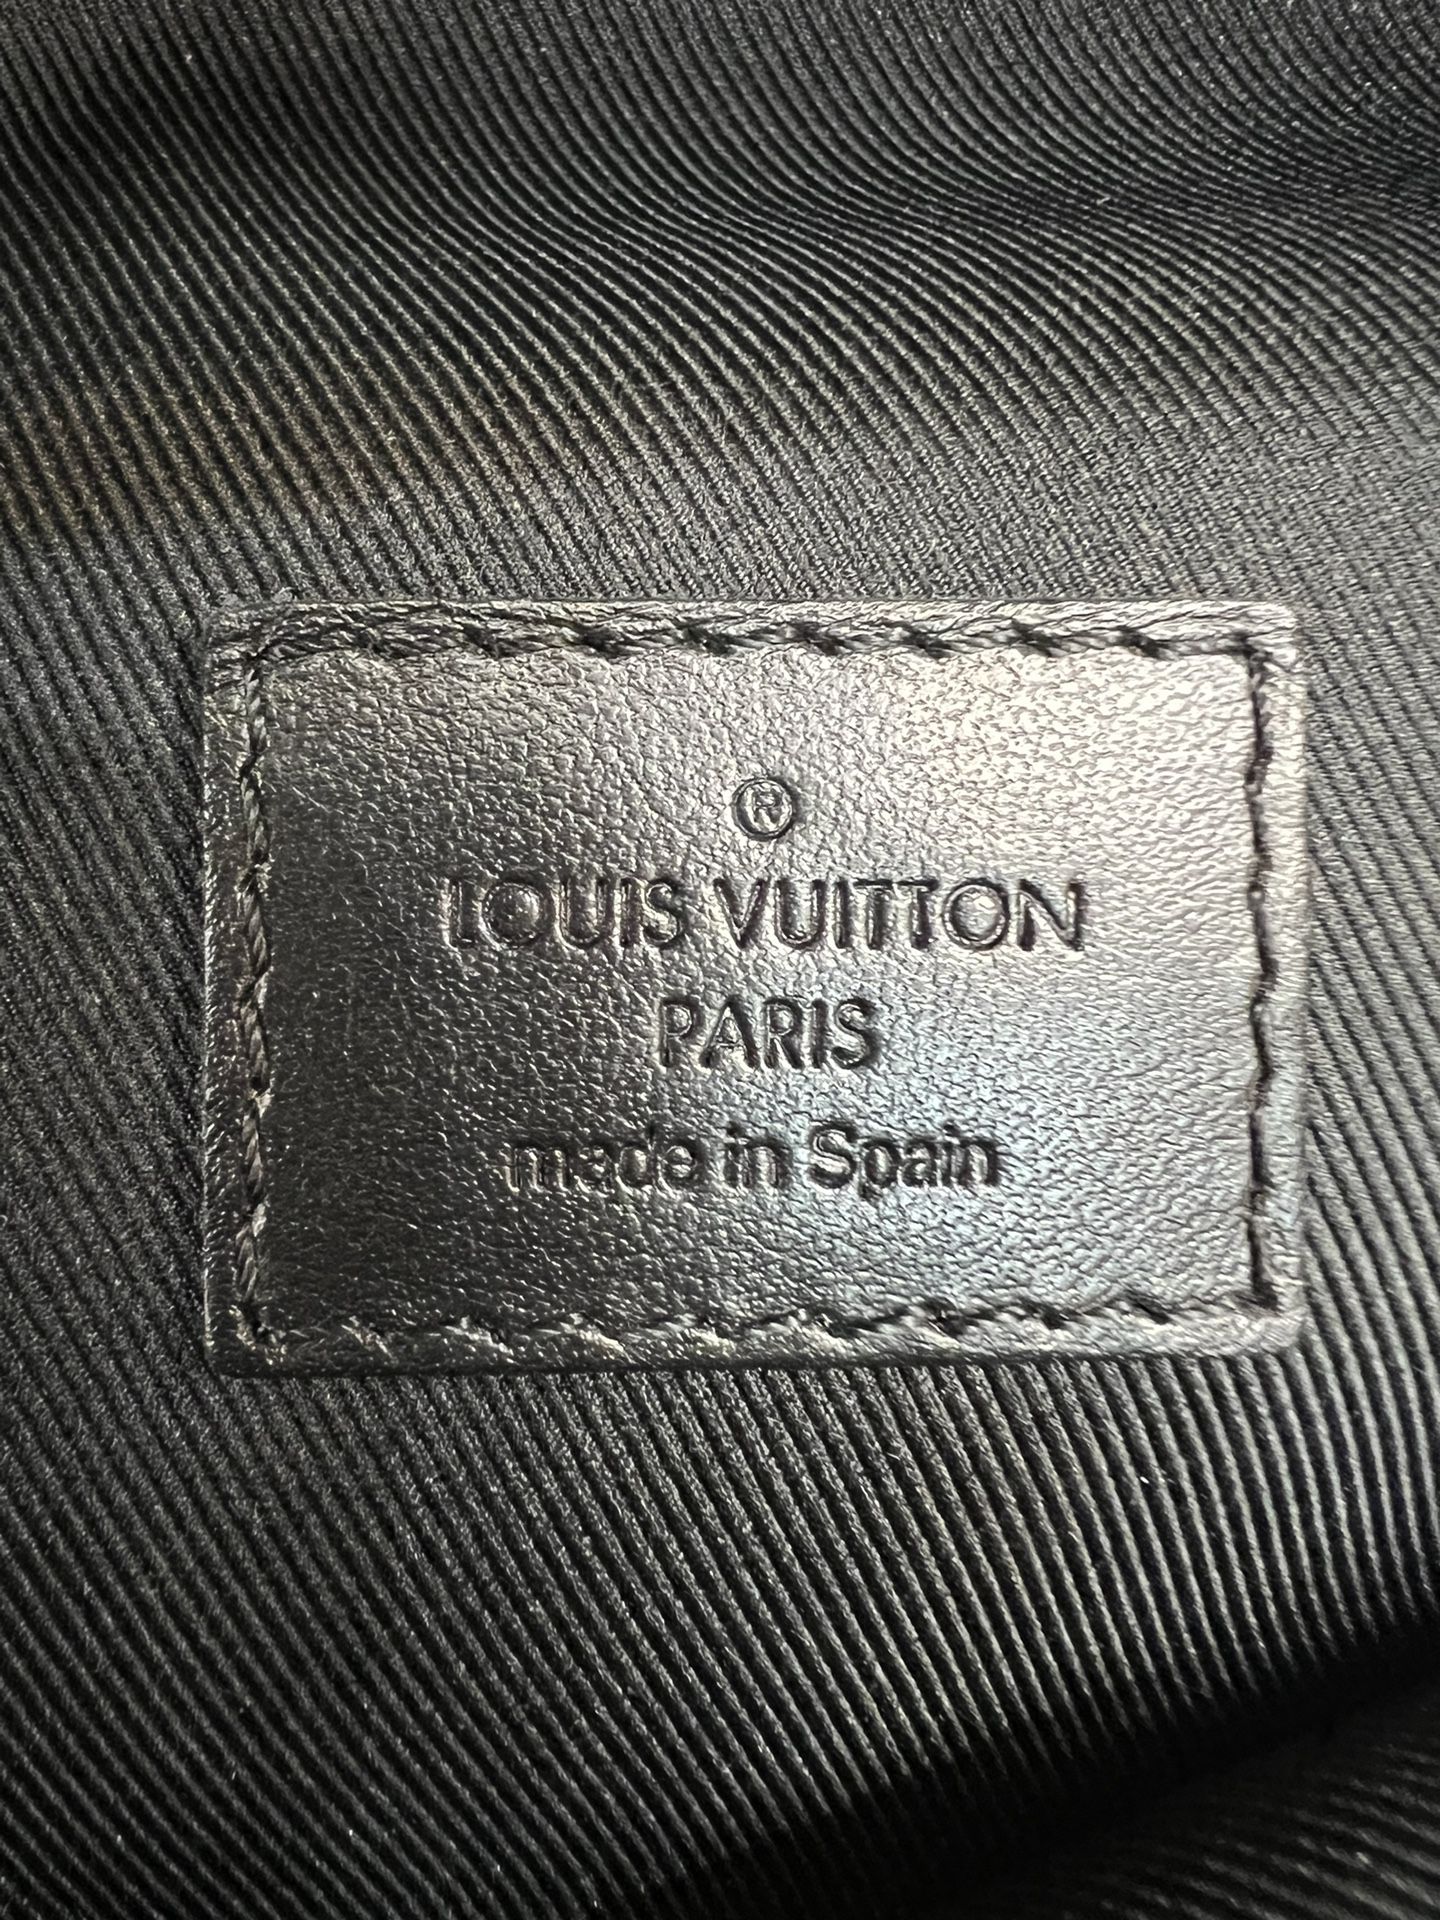 Buy [Used] LOUIS VUITTON Discovery Bum Bag PM Body Bag Monogram Eclipse  M46035 from Japan - Buy authentic Plus exclusive items from Japan